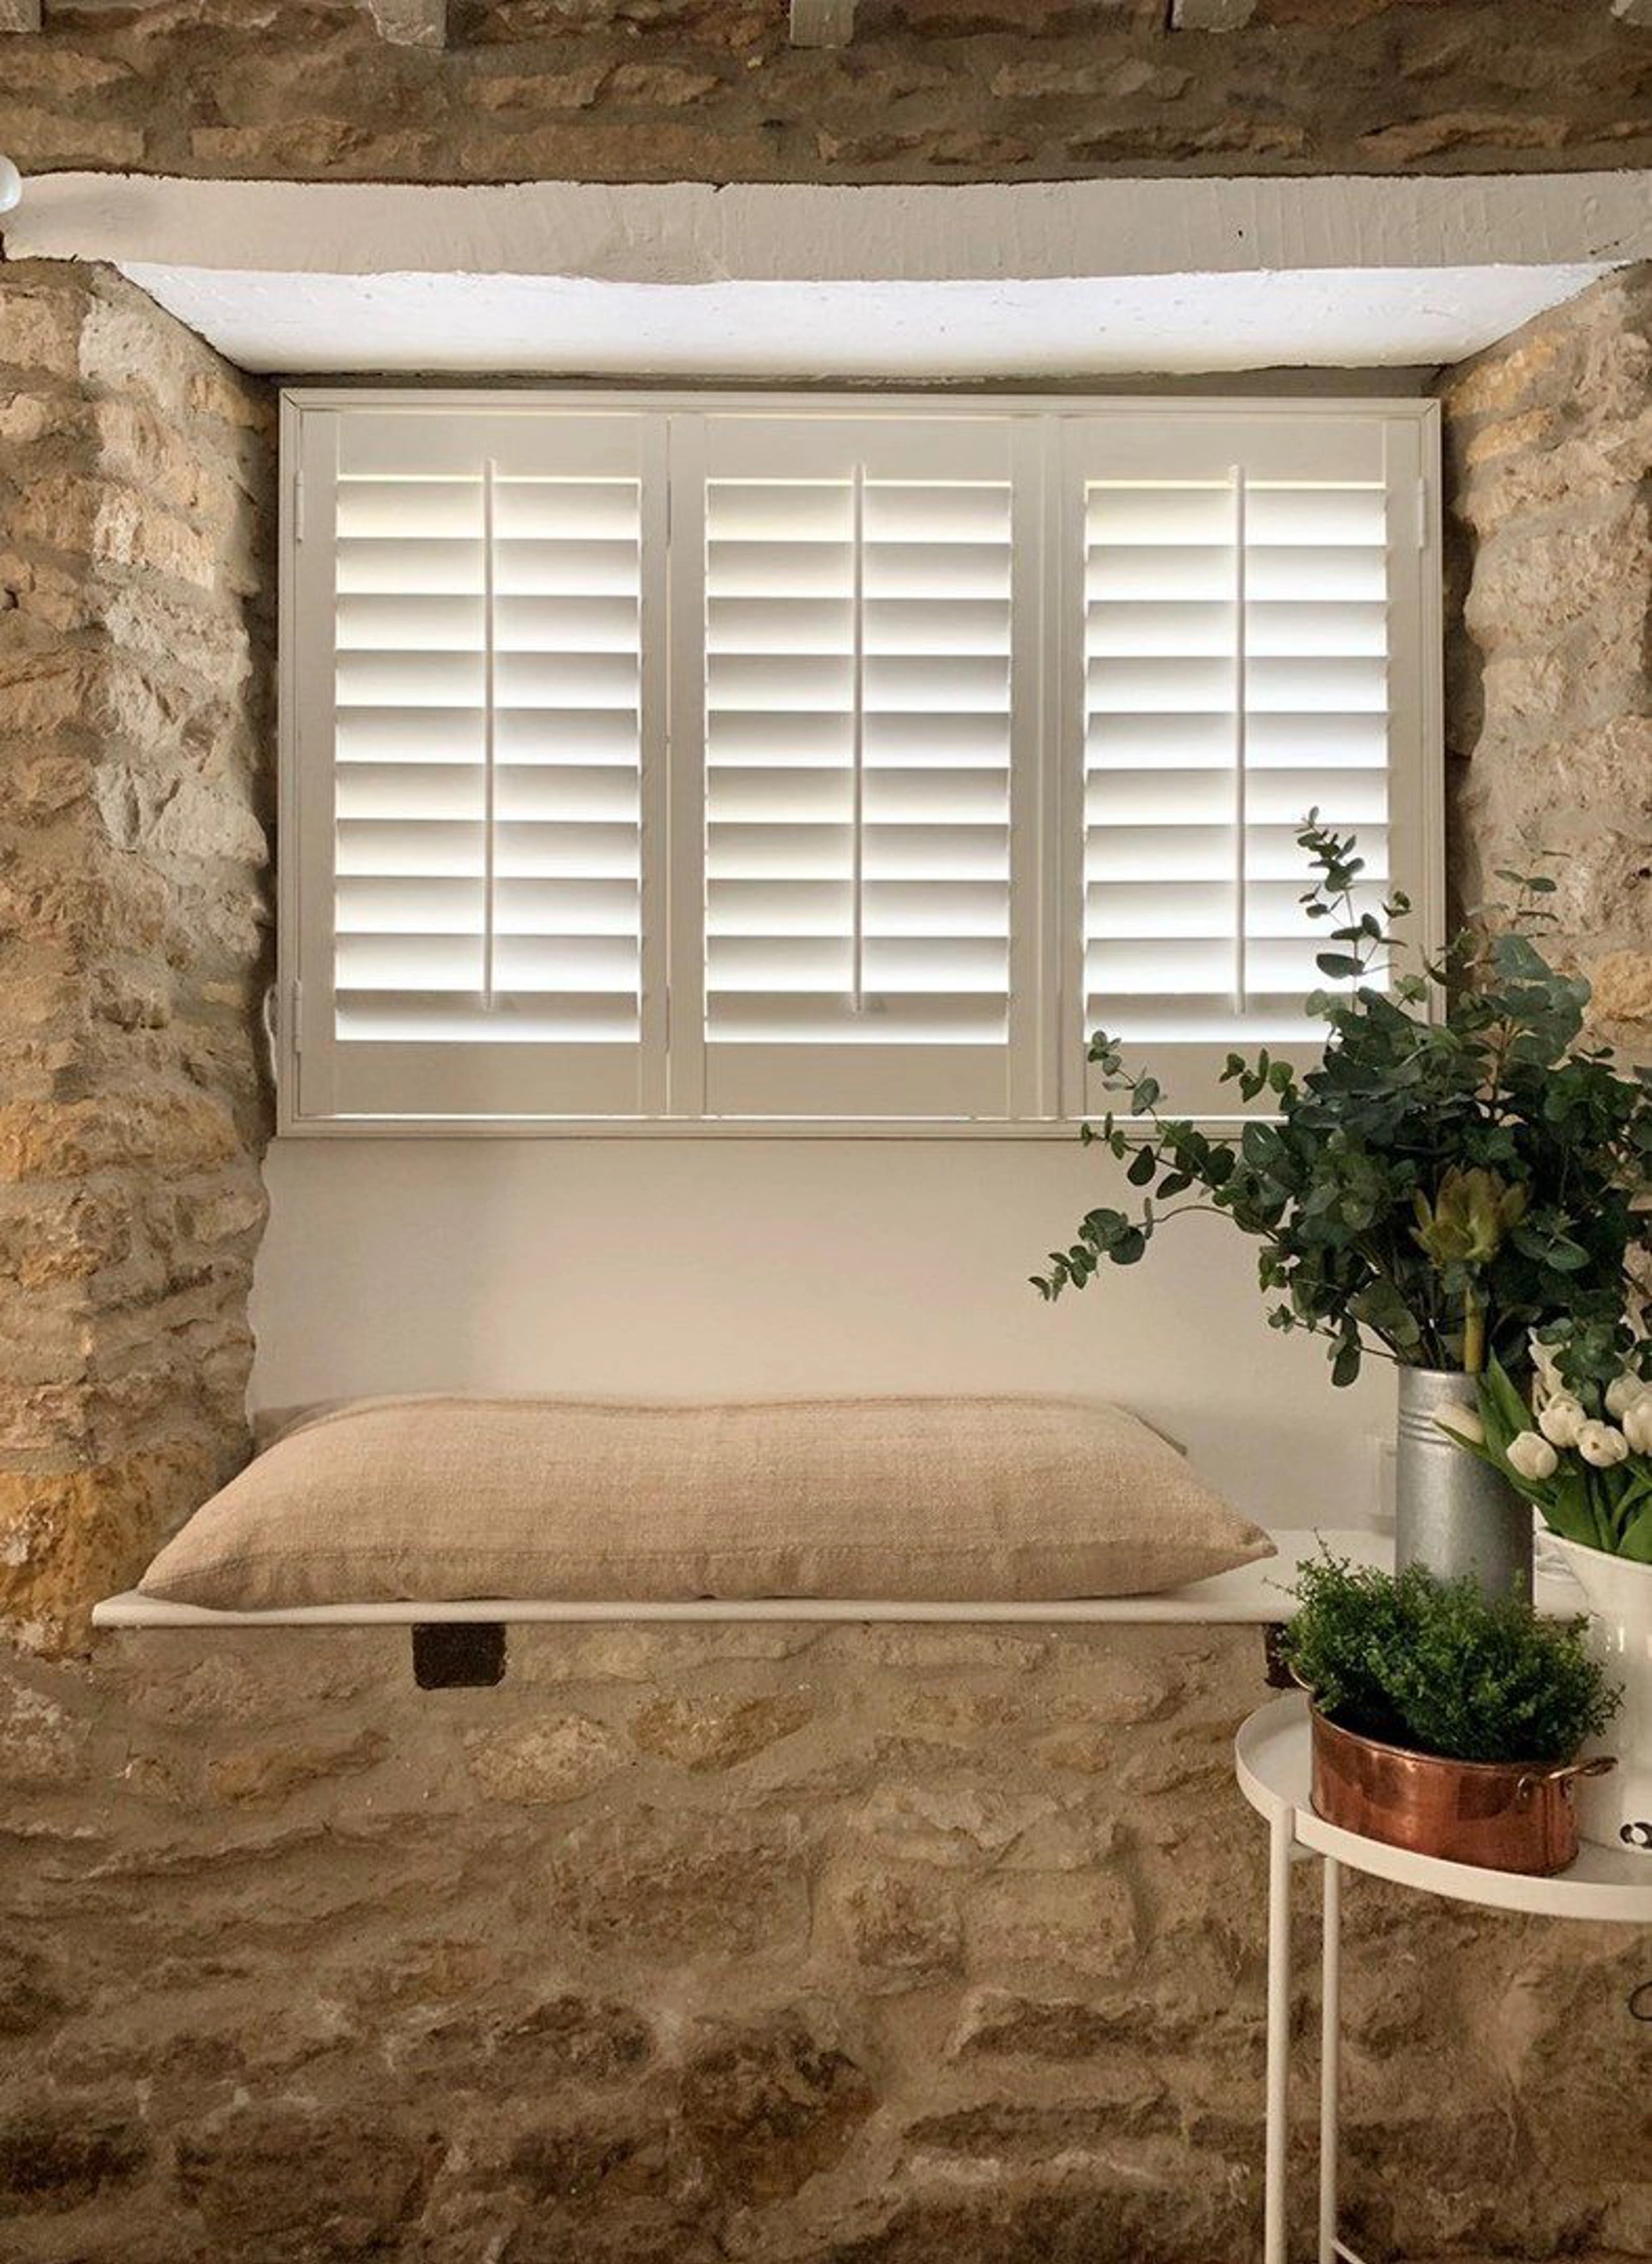 Traffic White wooden shutters in stone wall cottage